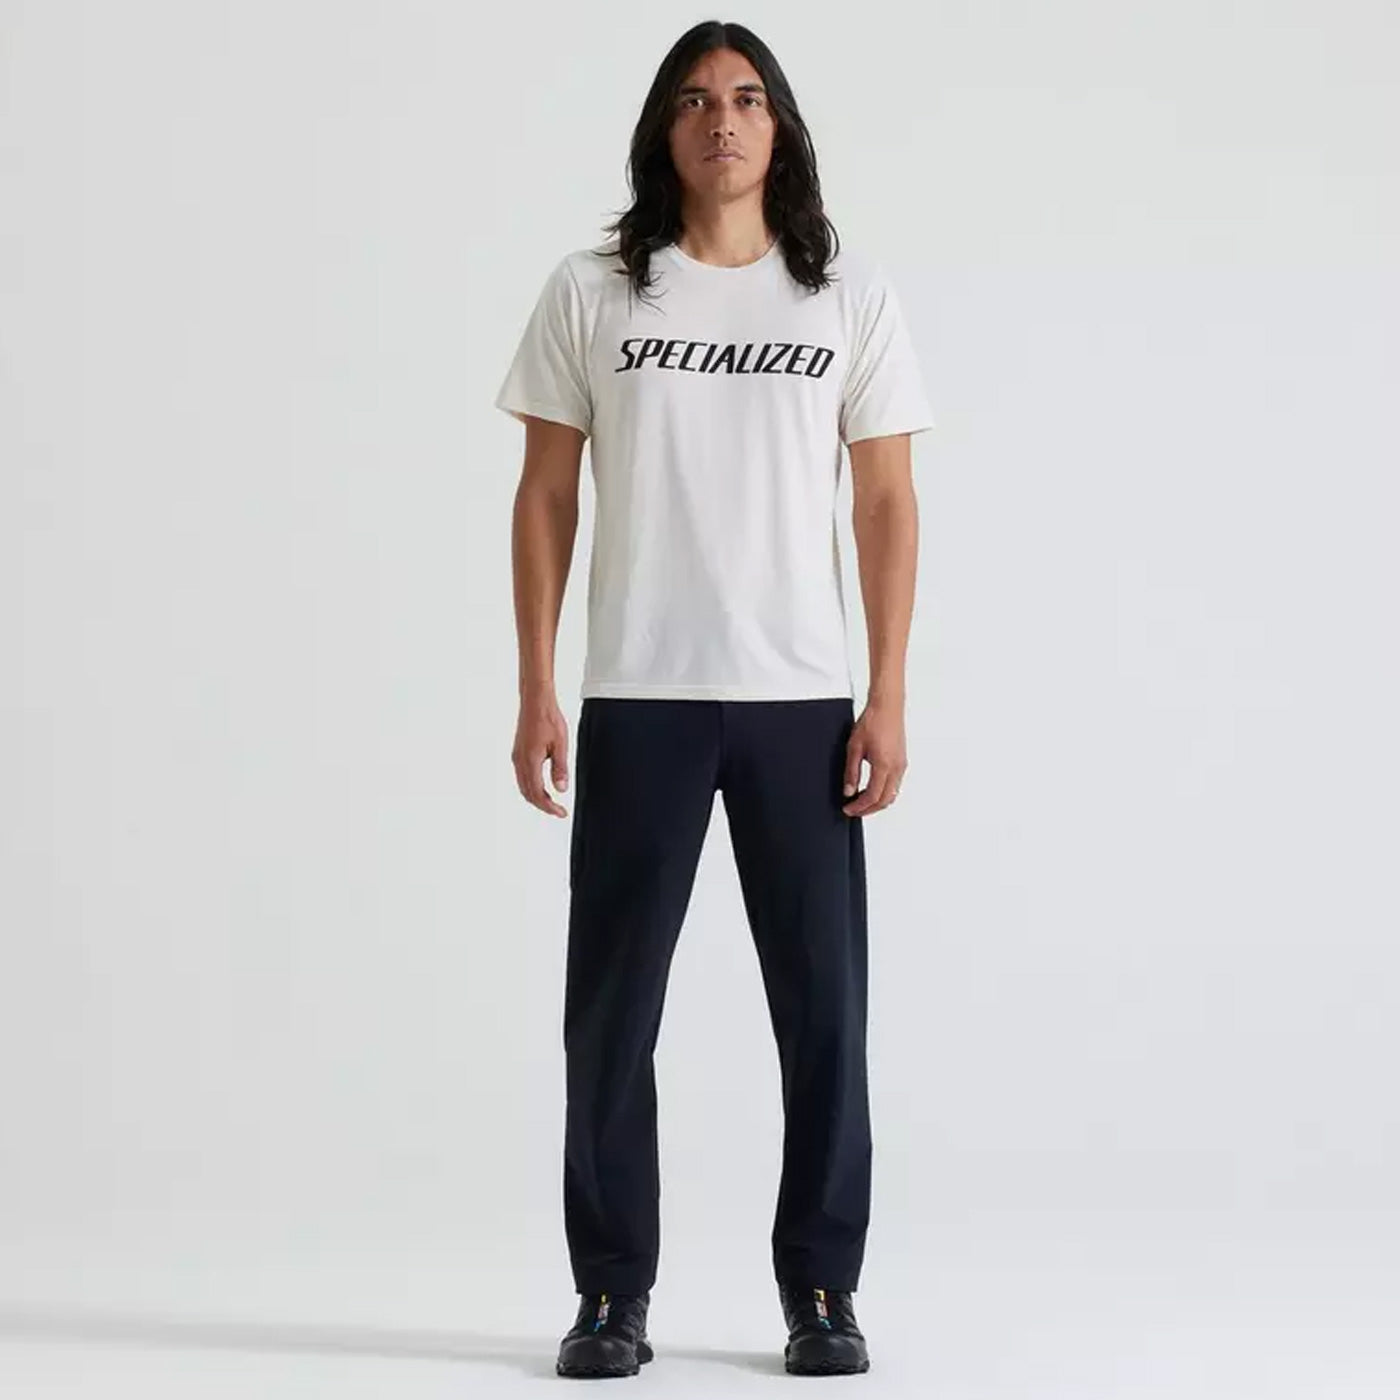 Specialized Wordmark T-Shirt - White | All4cycling